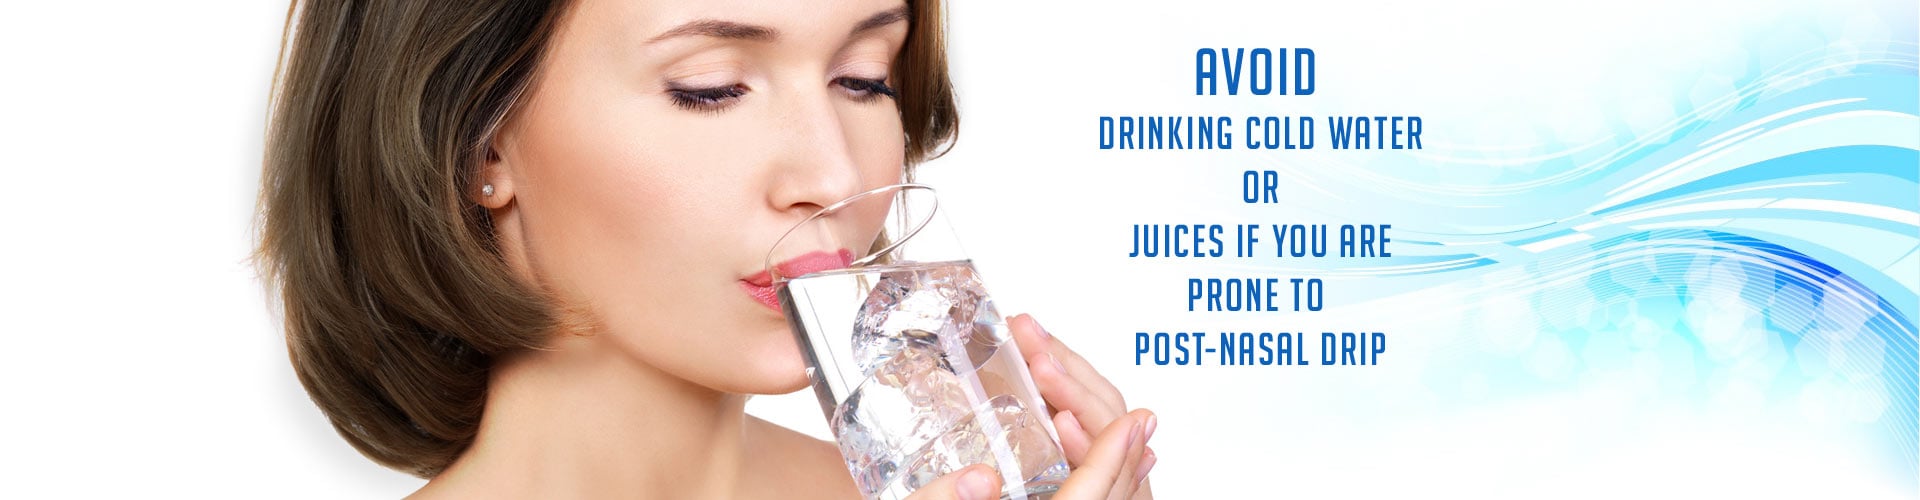 Avoid Drinking Cold Water or Juices if You Are Prone to Post-Nasal Drip